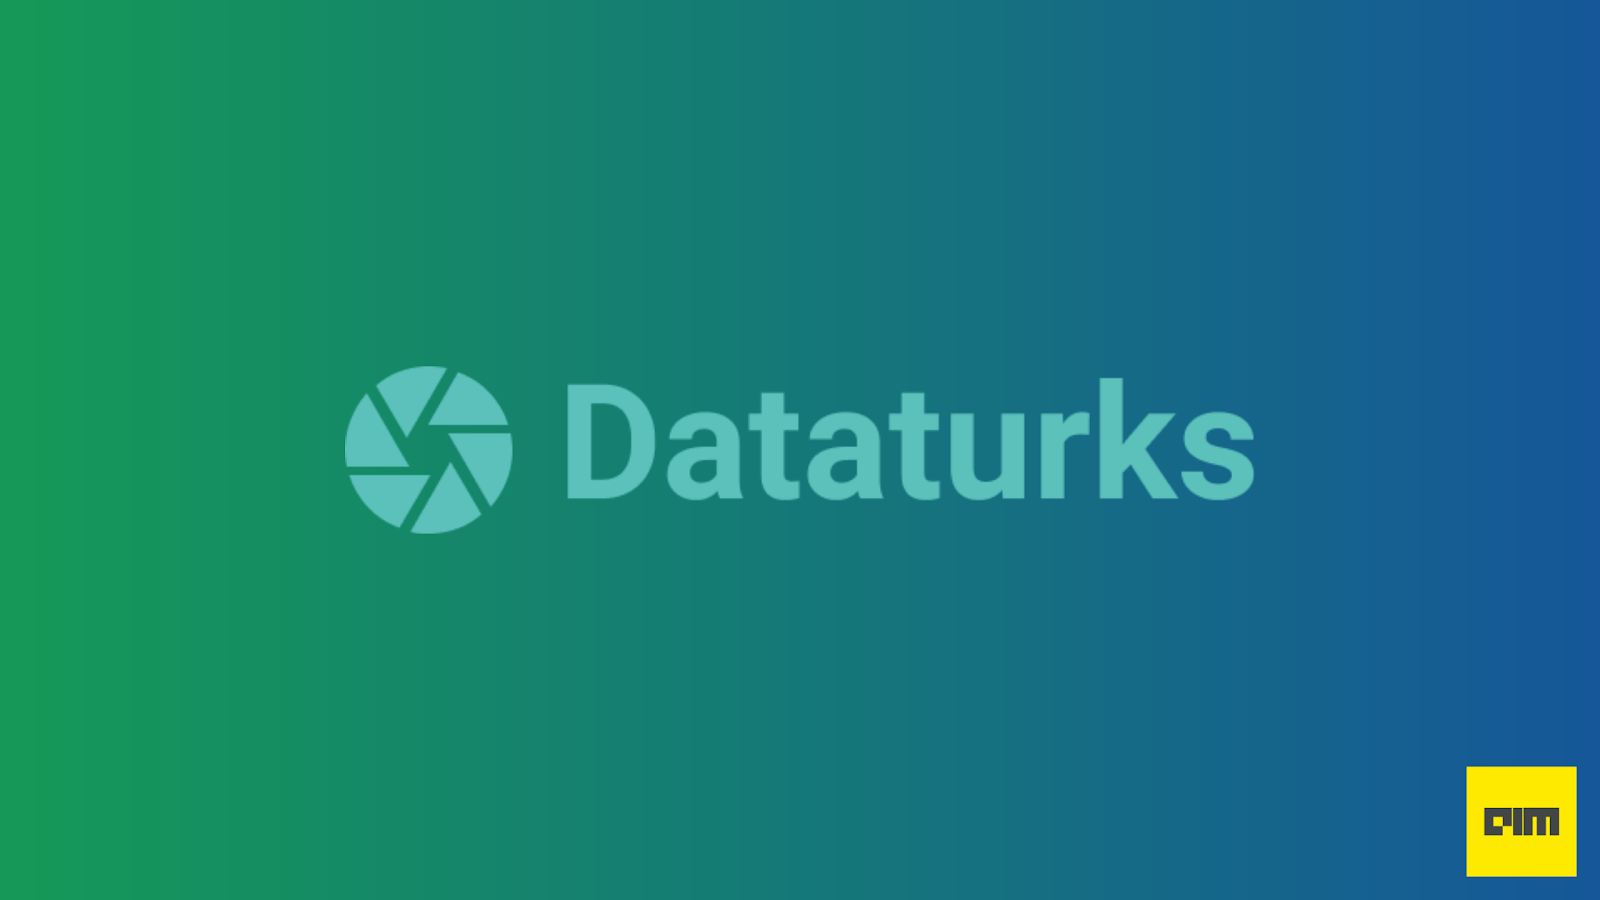 Guide To Dataturks - The Human-in-the-Loop Data Annotation Platform